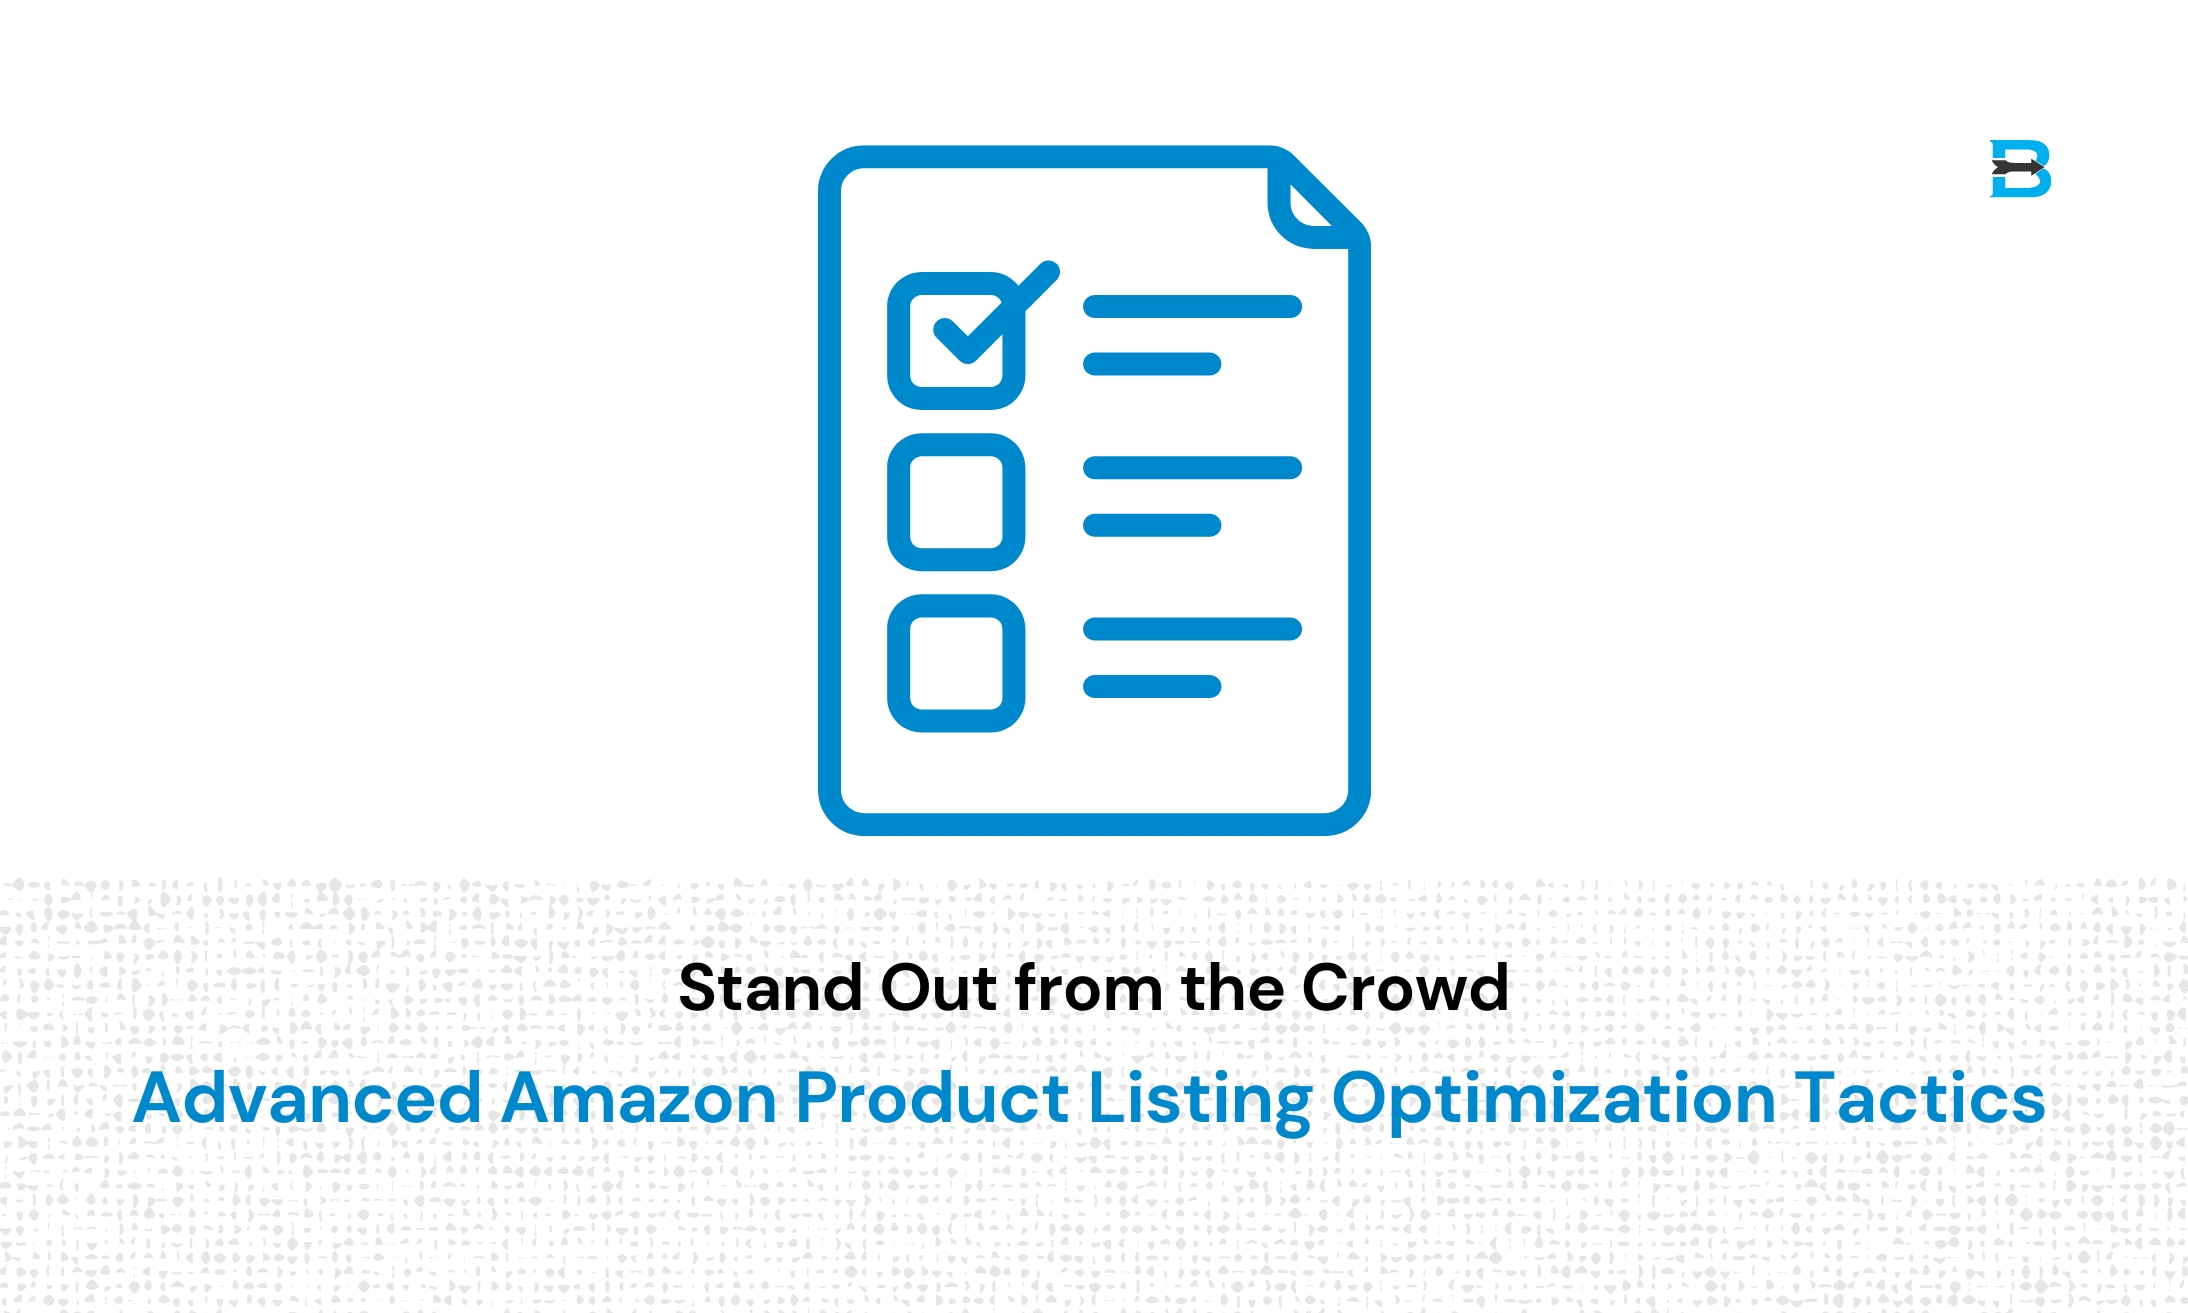 Stand Out from the Crowd Advanced Amazon Product Listing Optimization Tactics